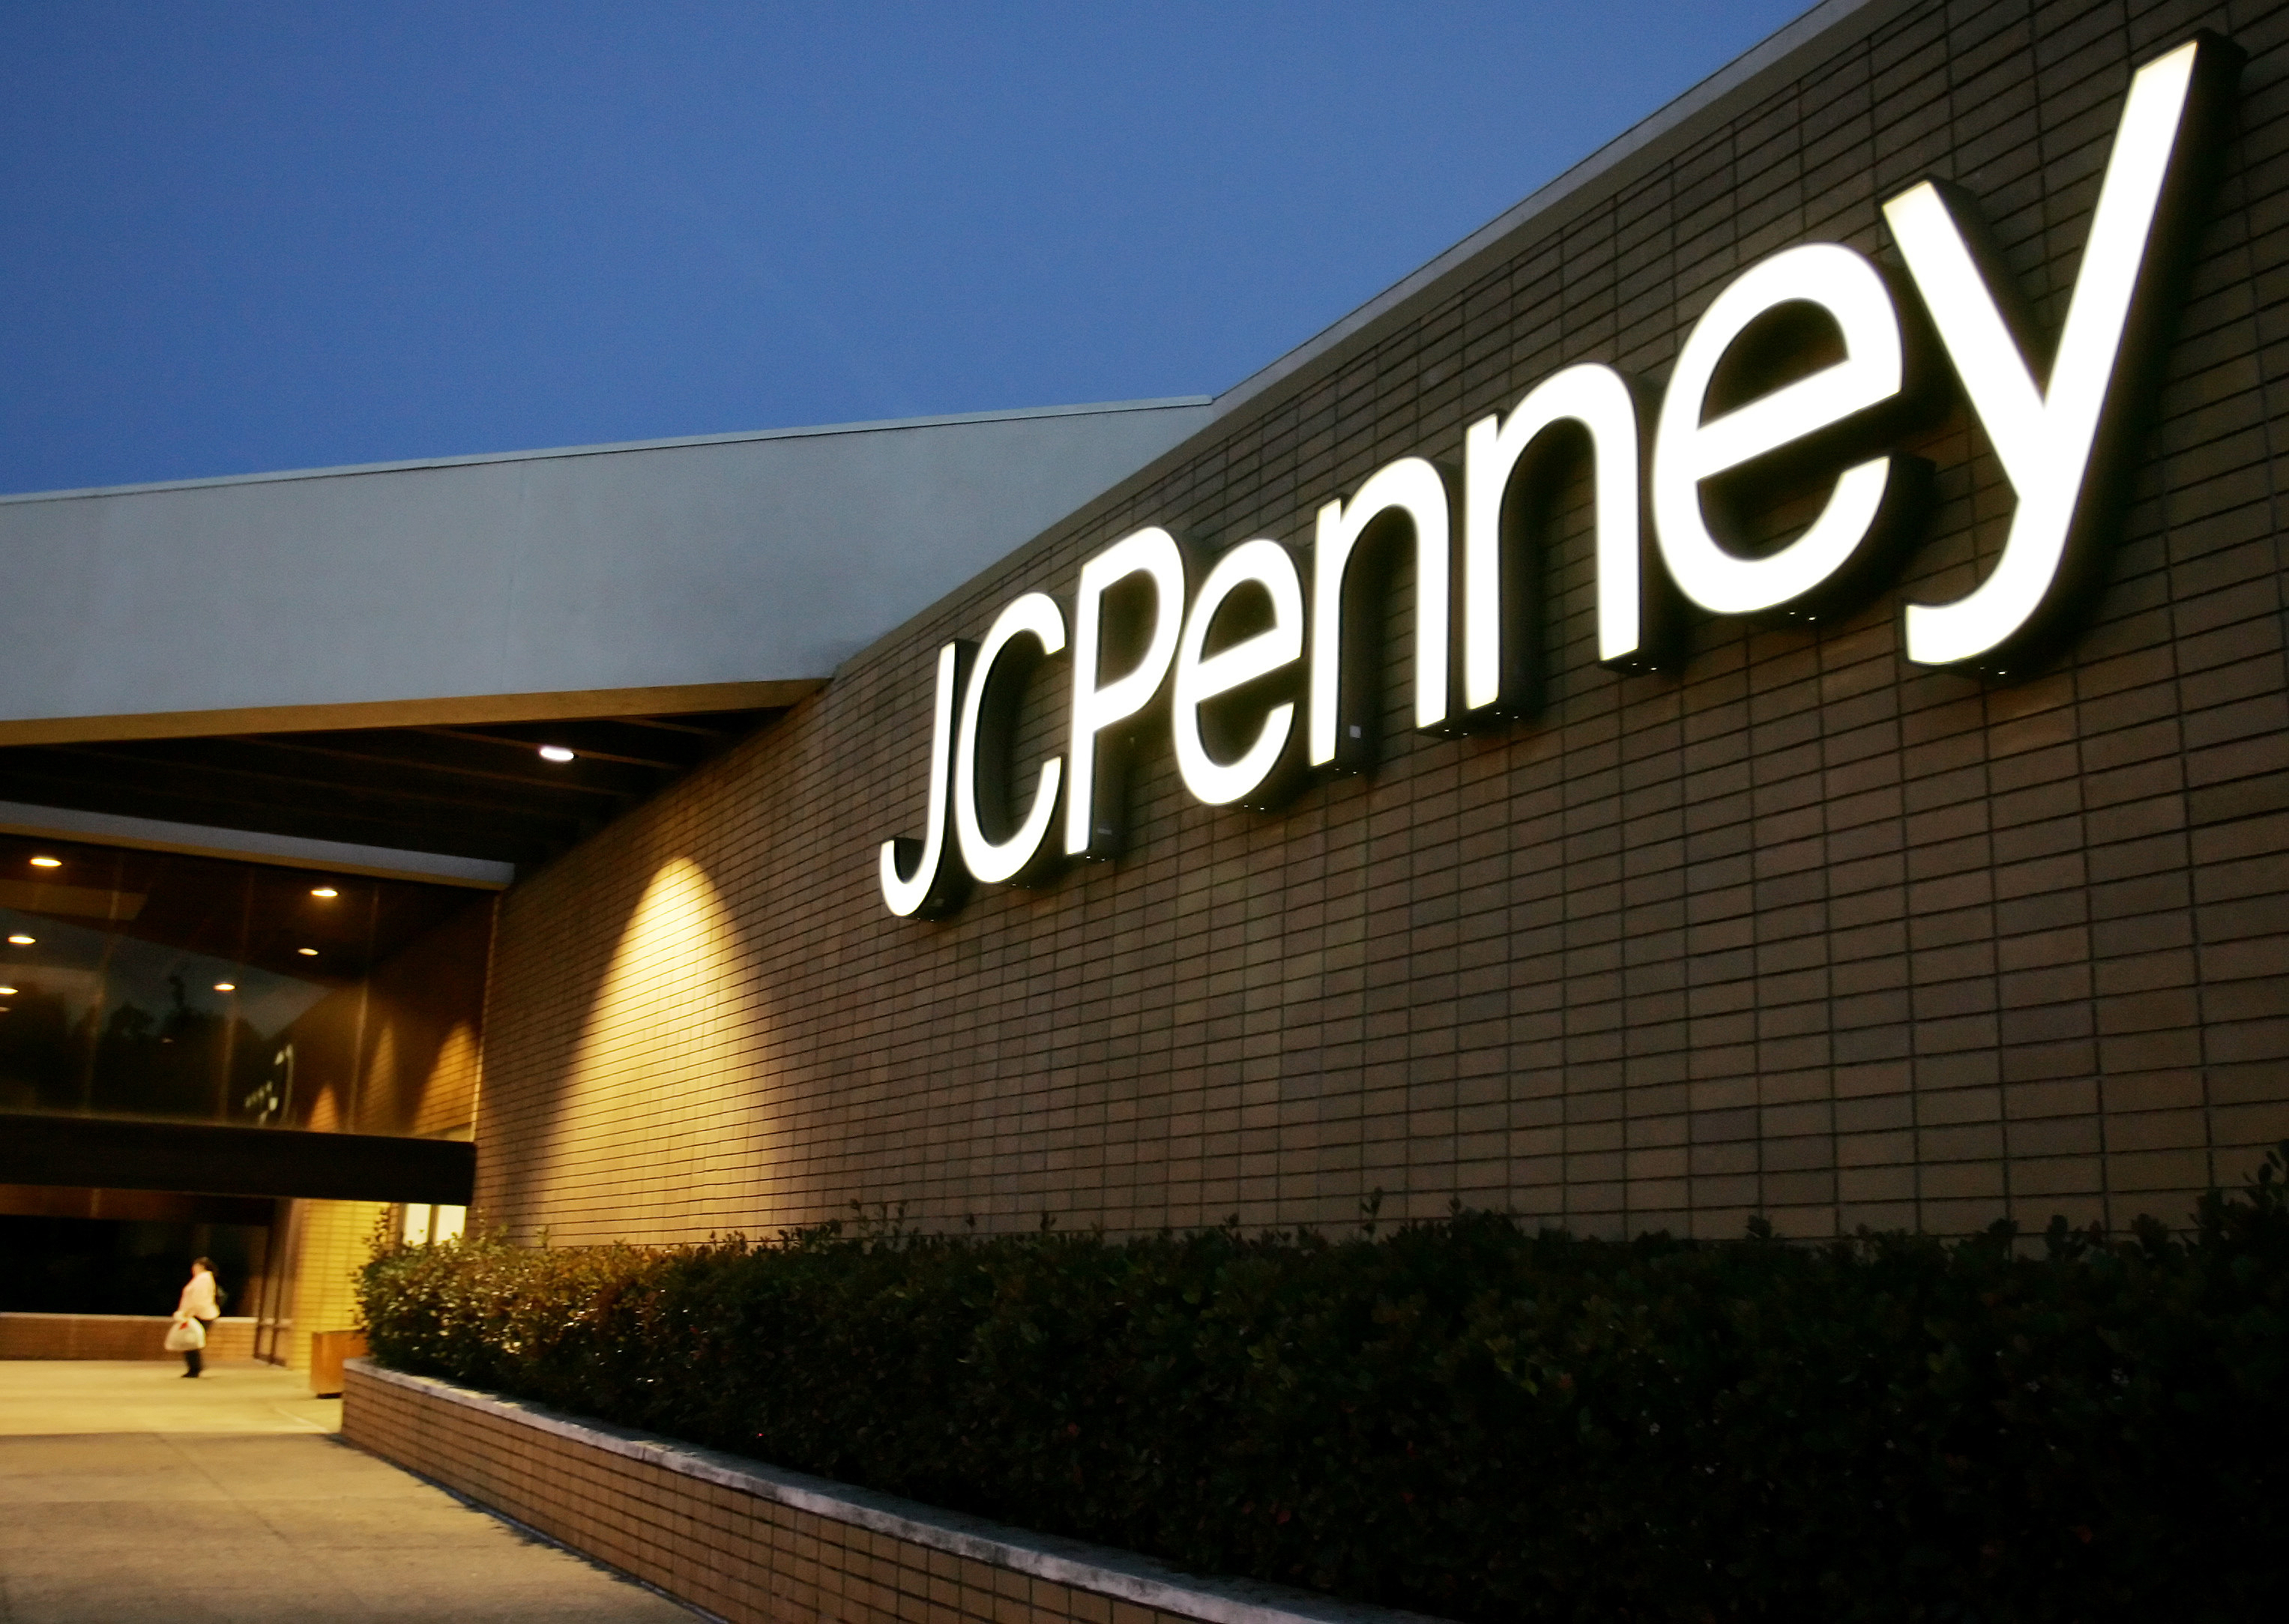  JCPenney